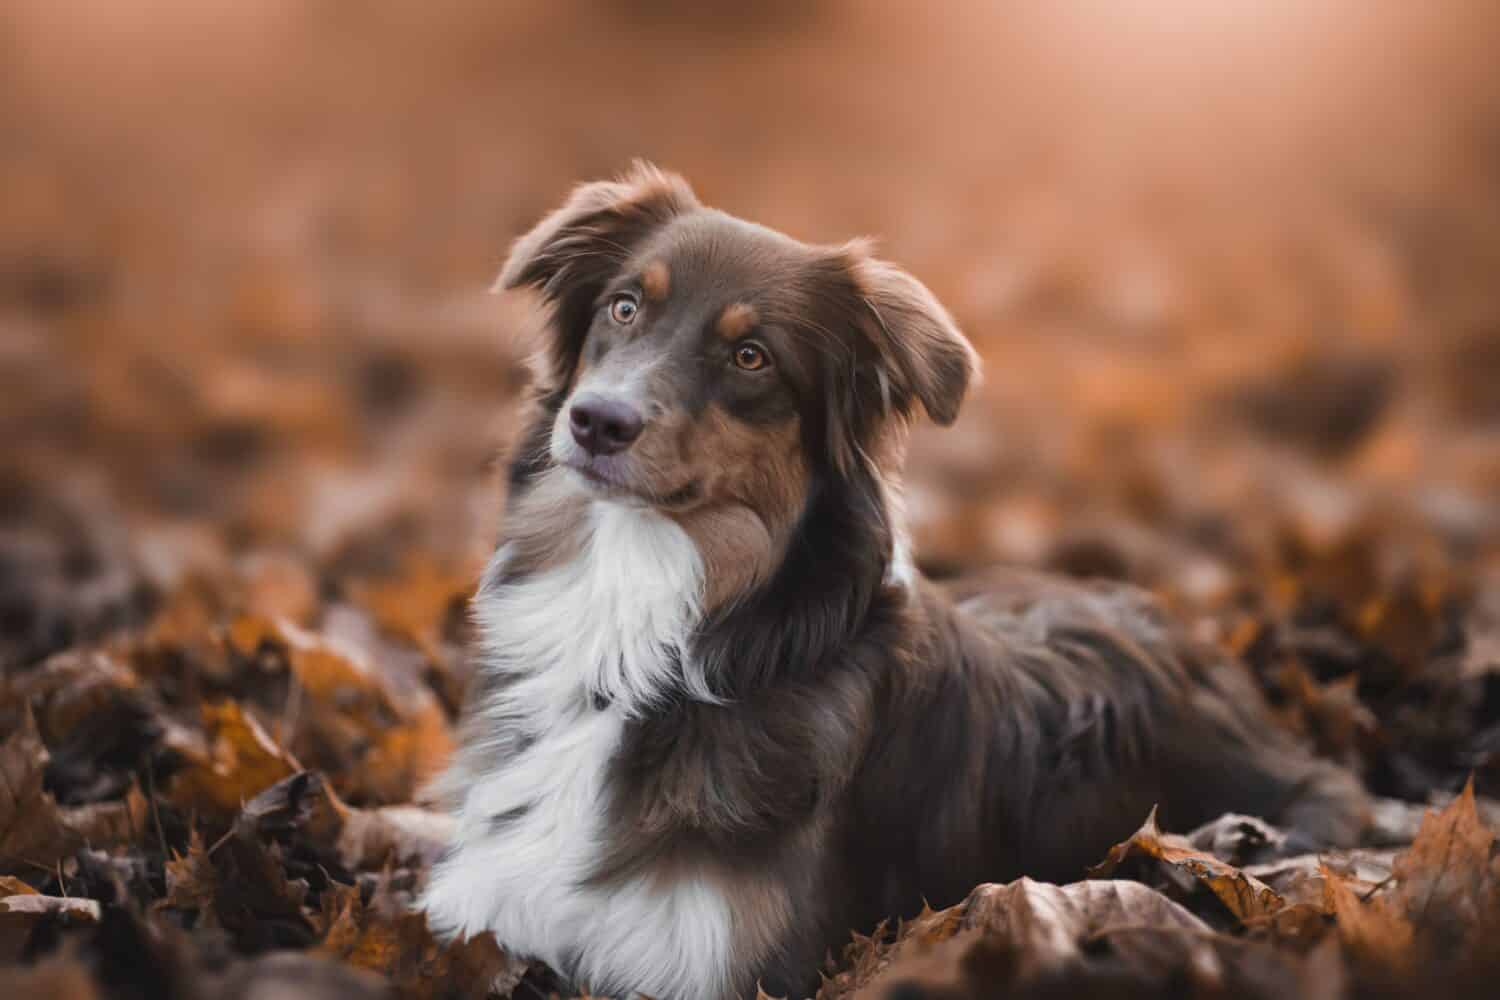 Why an Australian Shepherd Can Be the Best Dog for You